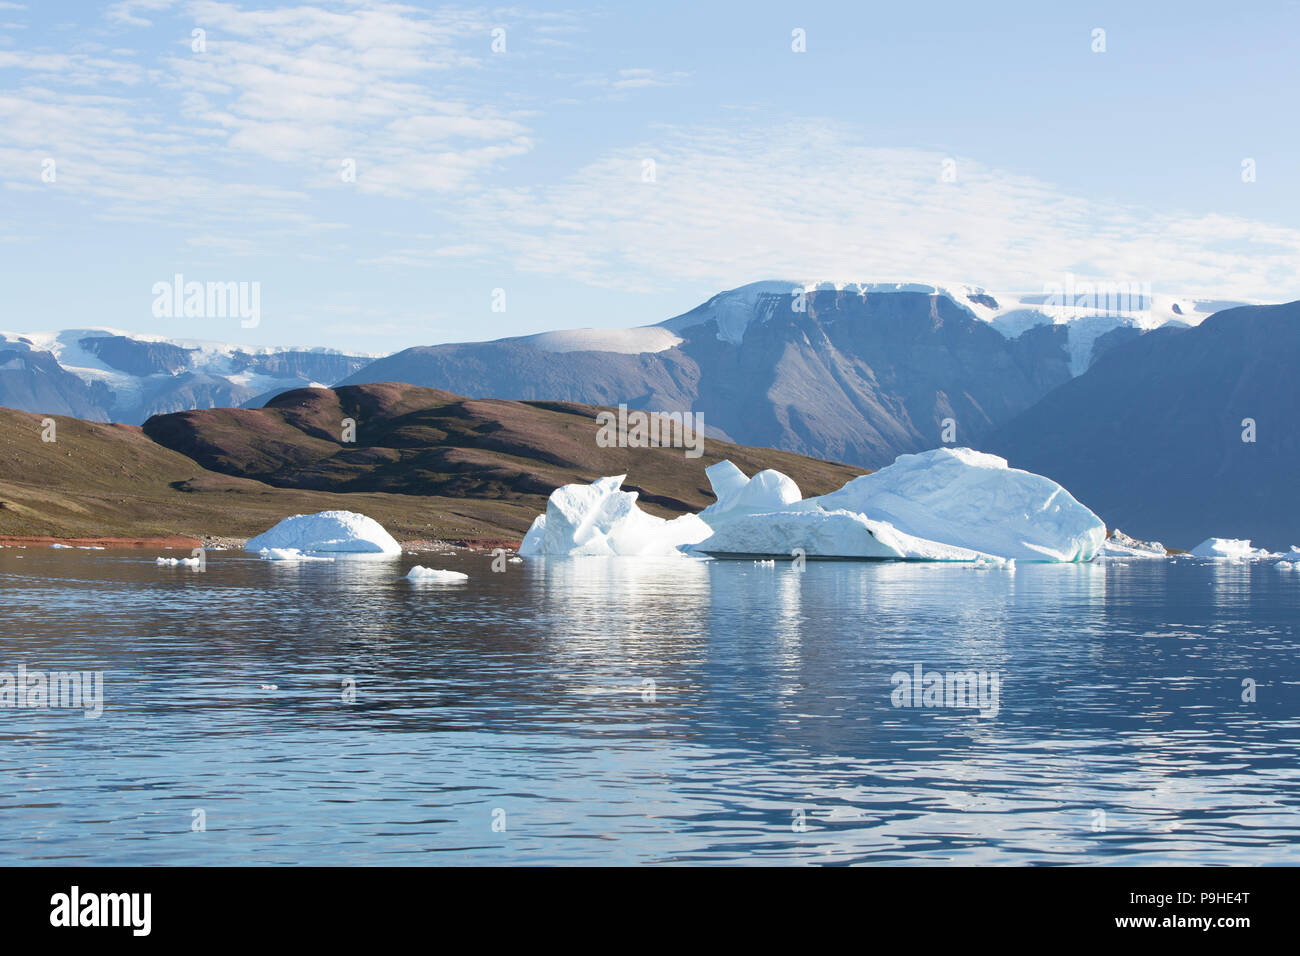 Les icebergs, Scoresby Sound, Groenland Banque D'Images